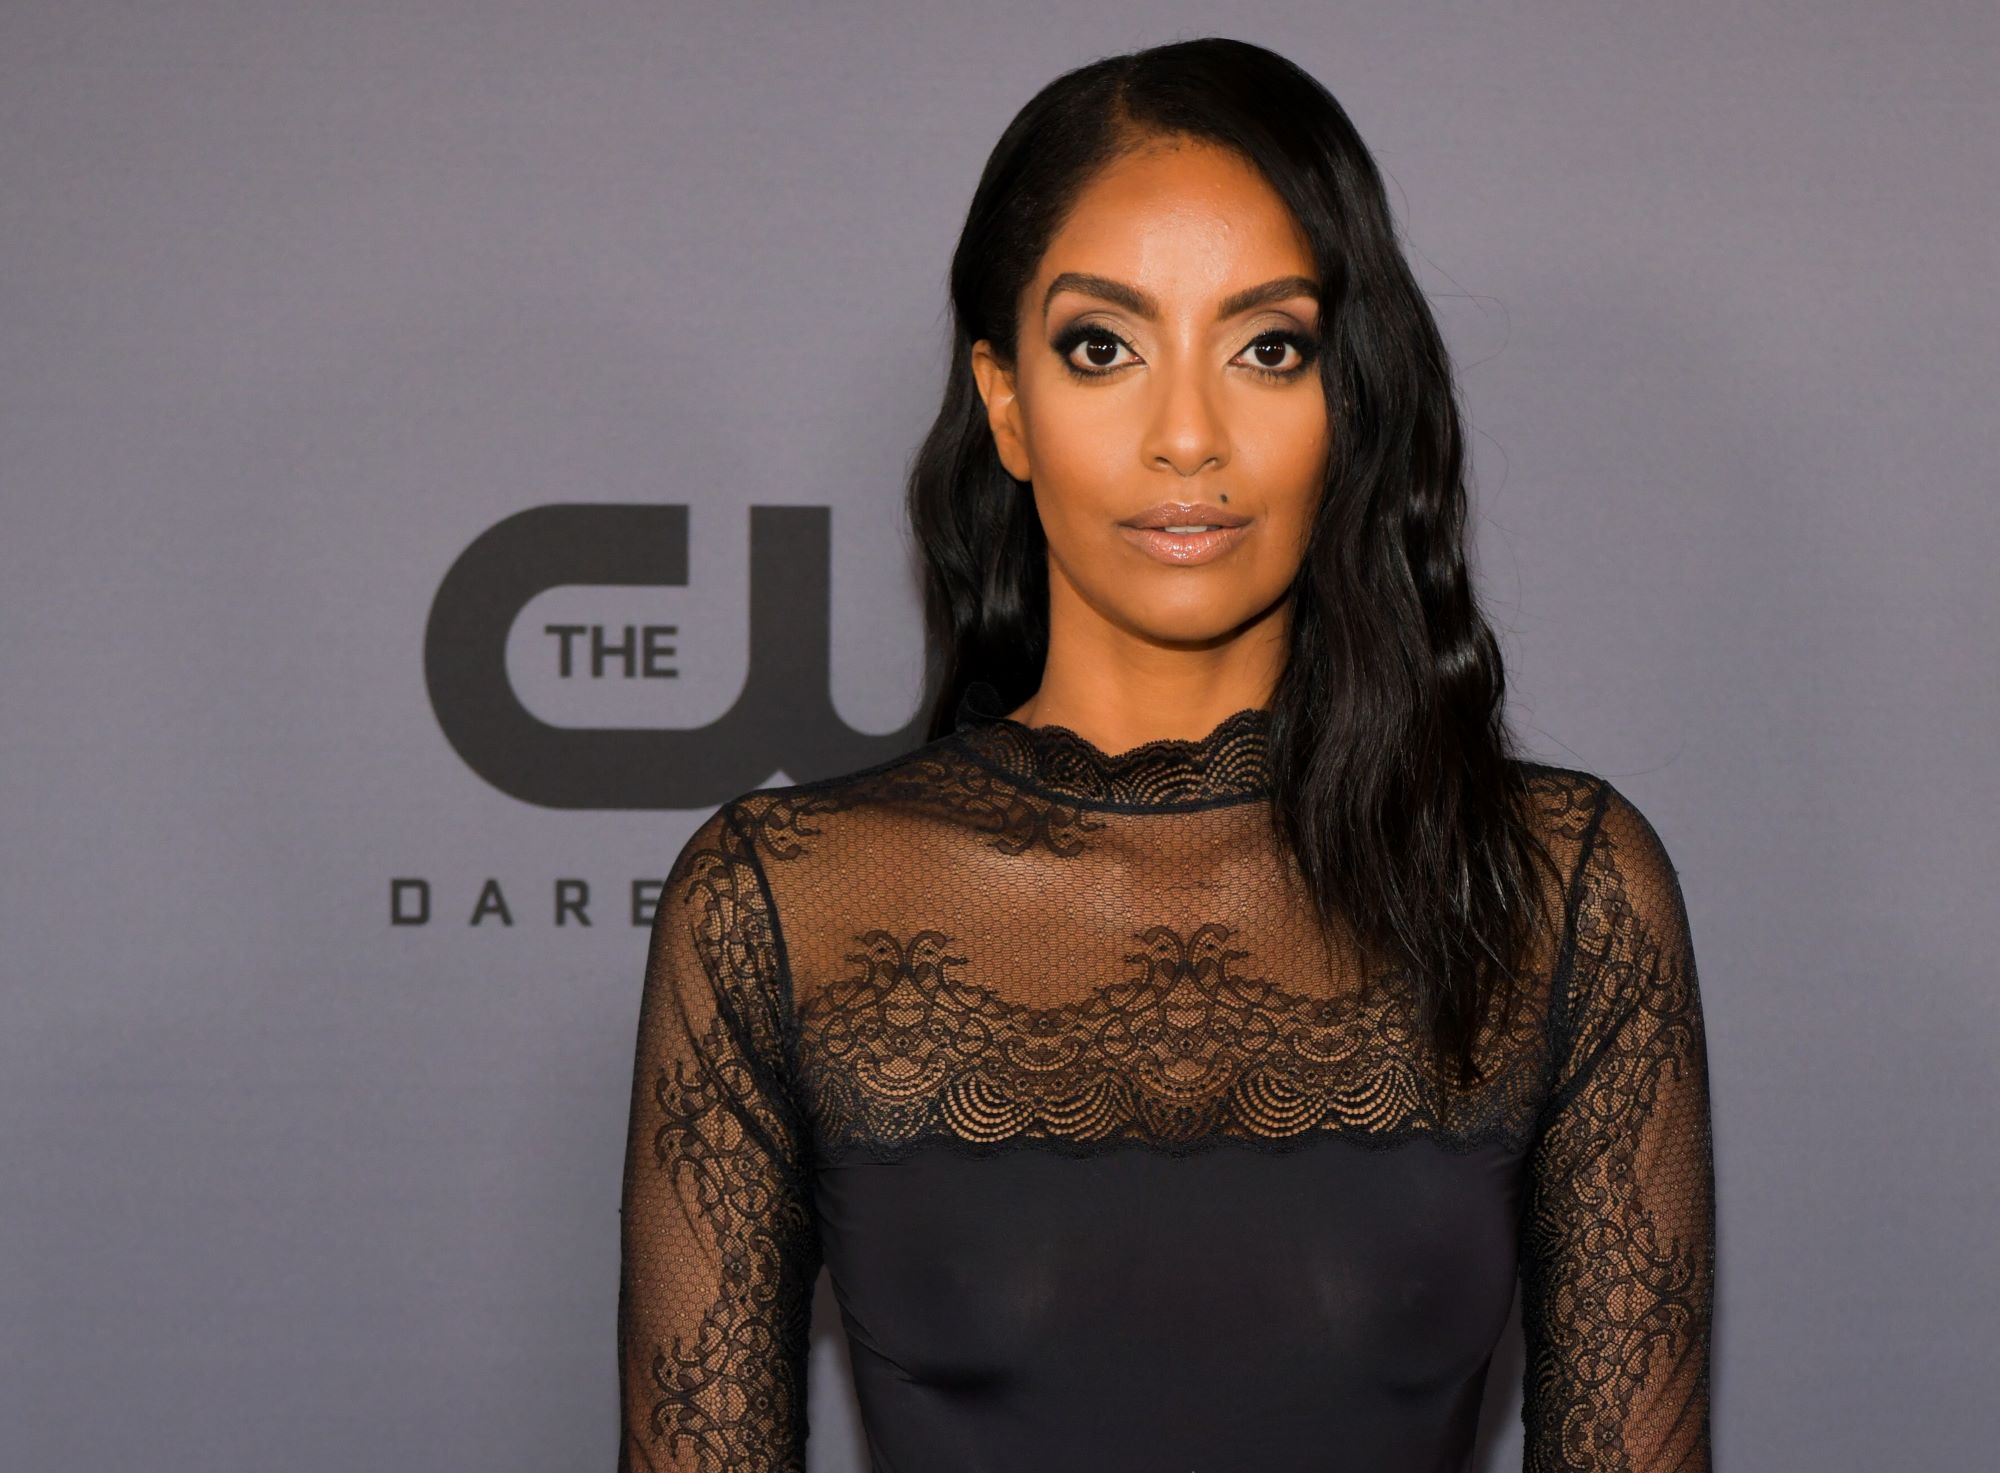 'Supergirl' actor Azie Tesfai wears a balck lace top and her hair down on the red carpet.